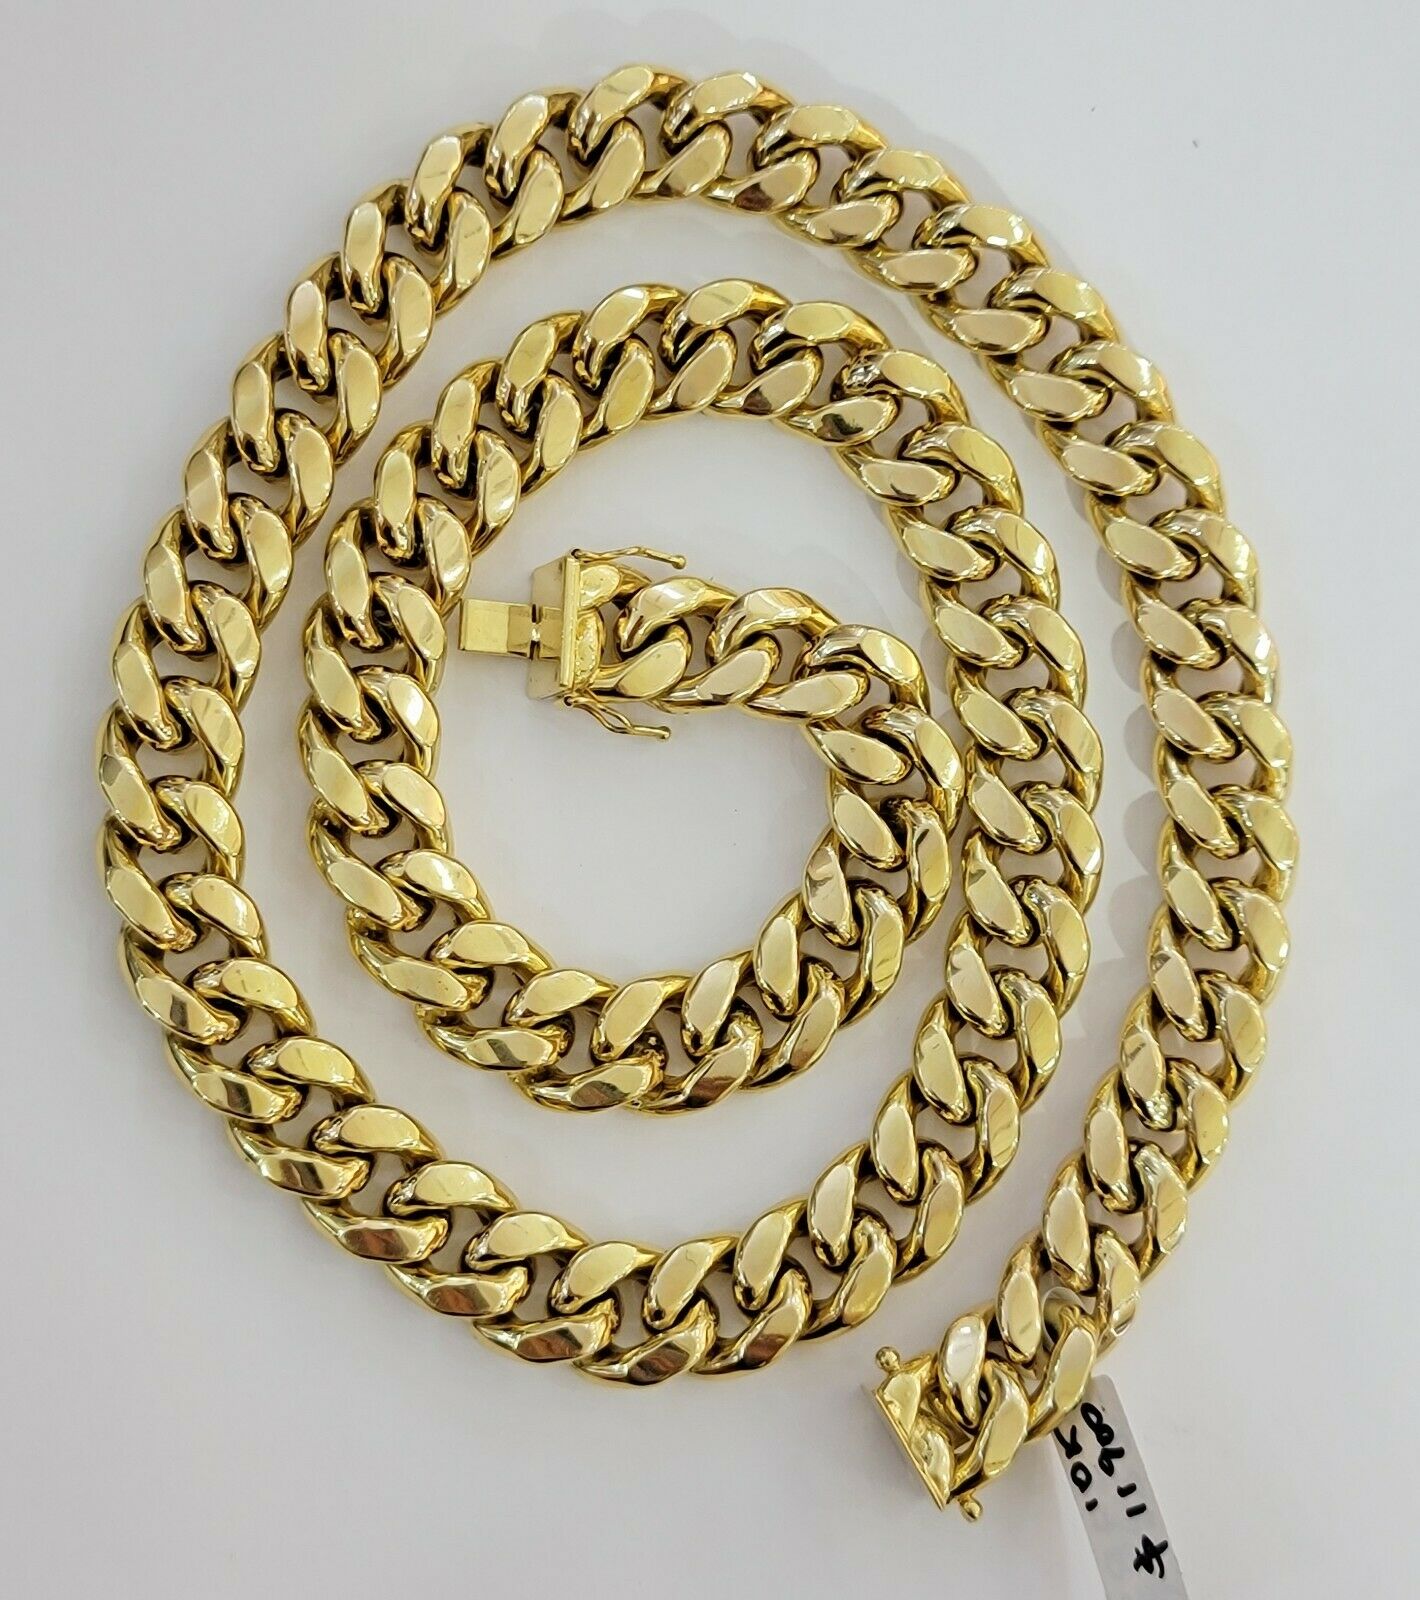 Real Gold Necklace Miami Cuban Link Chain THICK 13MM 20"-30" 10KT Yellow Gld MEN